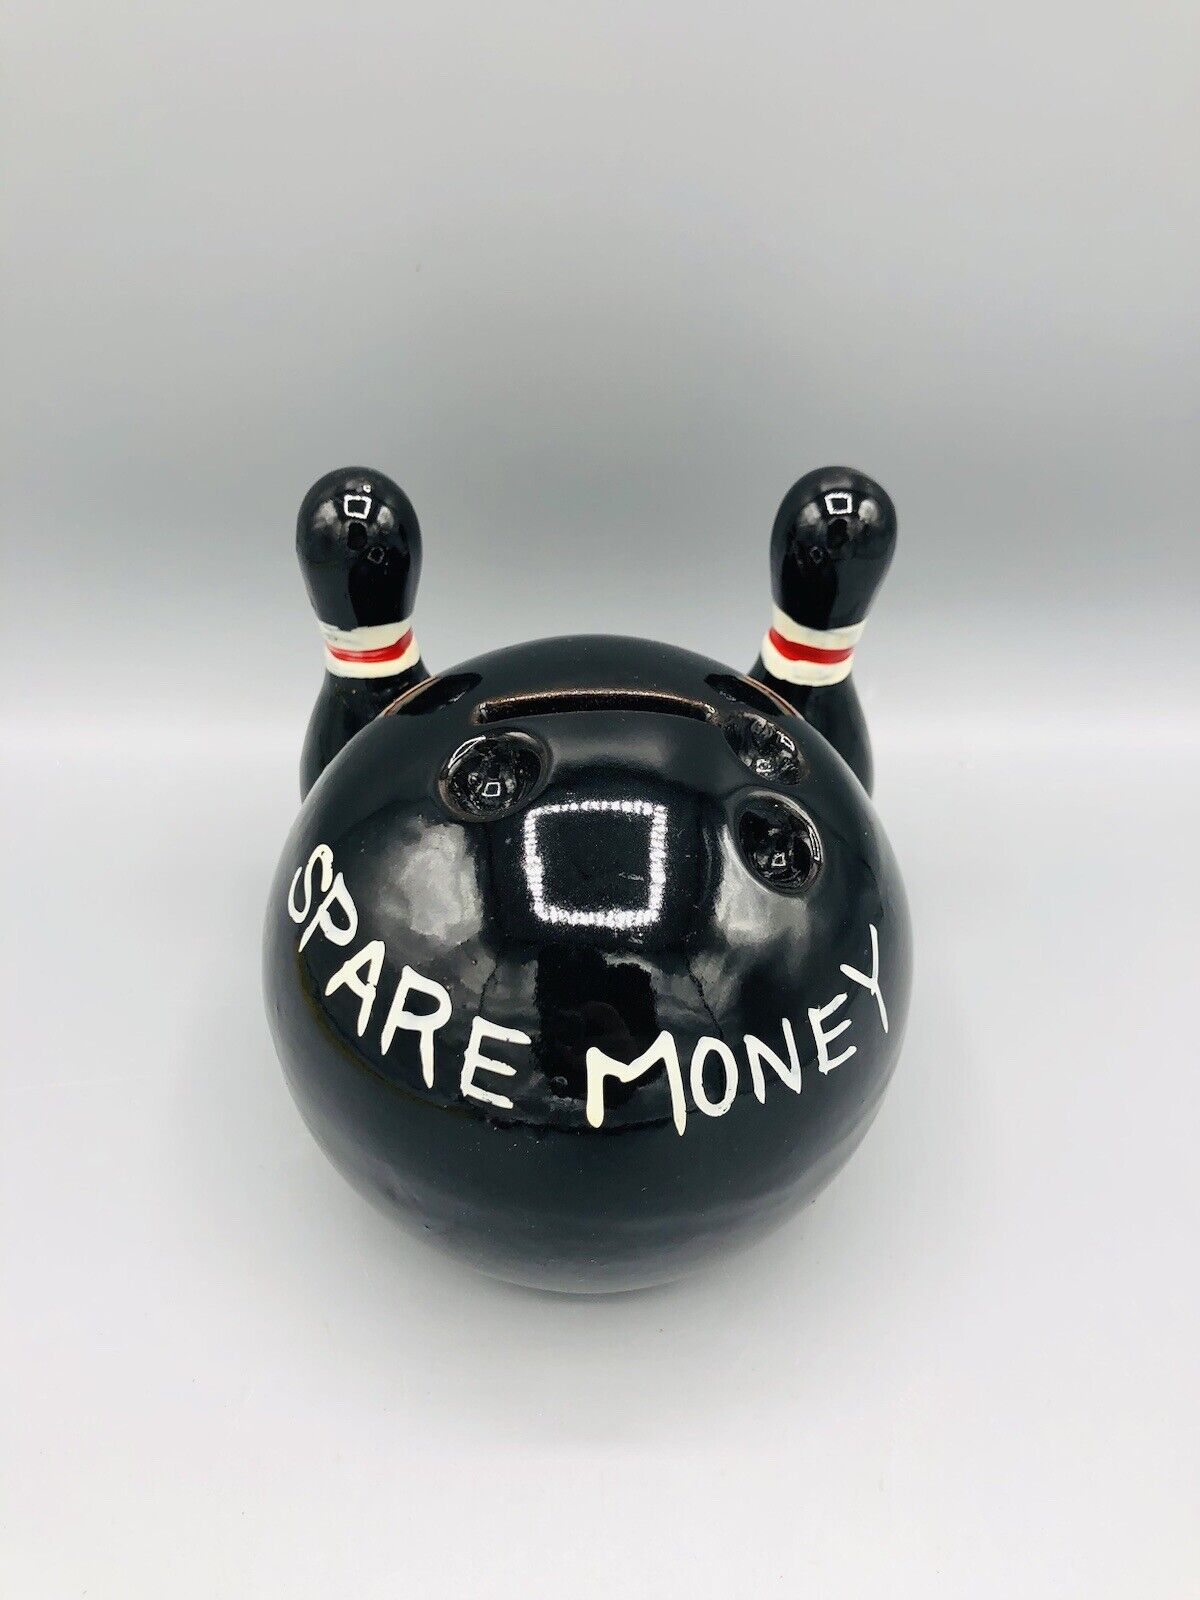 Vintage Mid-Century Bowling “SPARE MONEY” Ceramic Coin Bank with Stopper